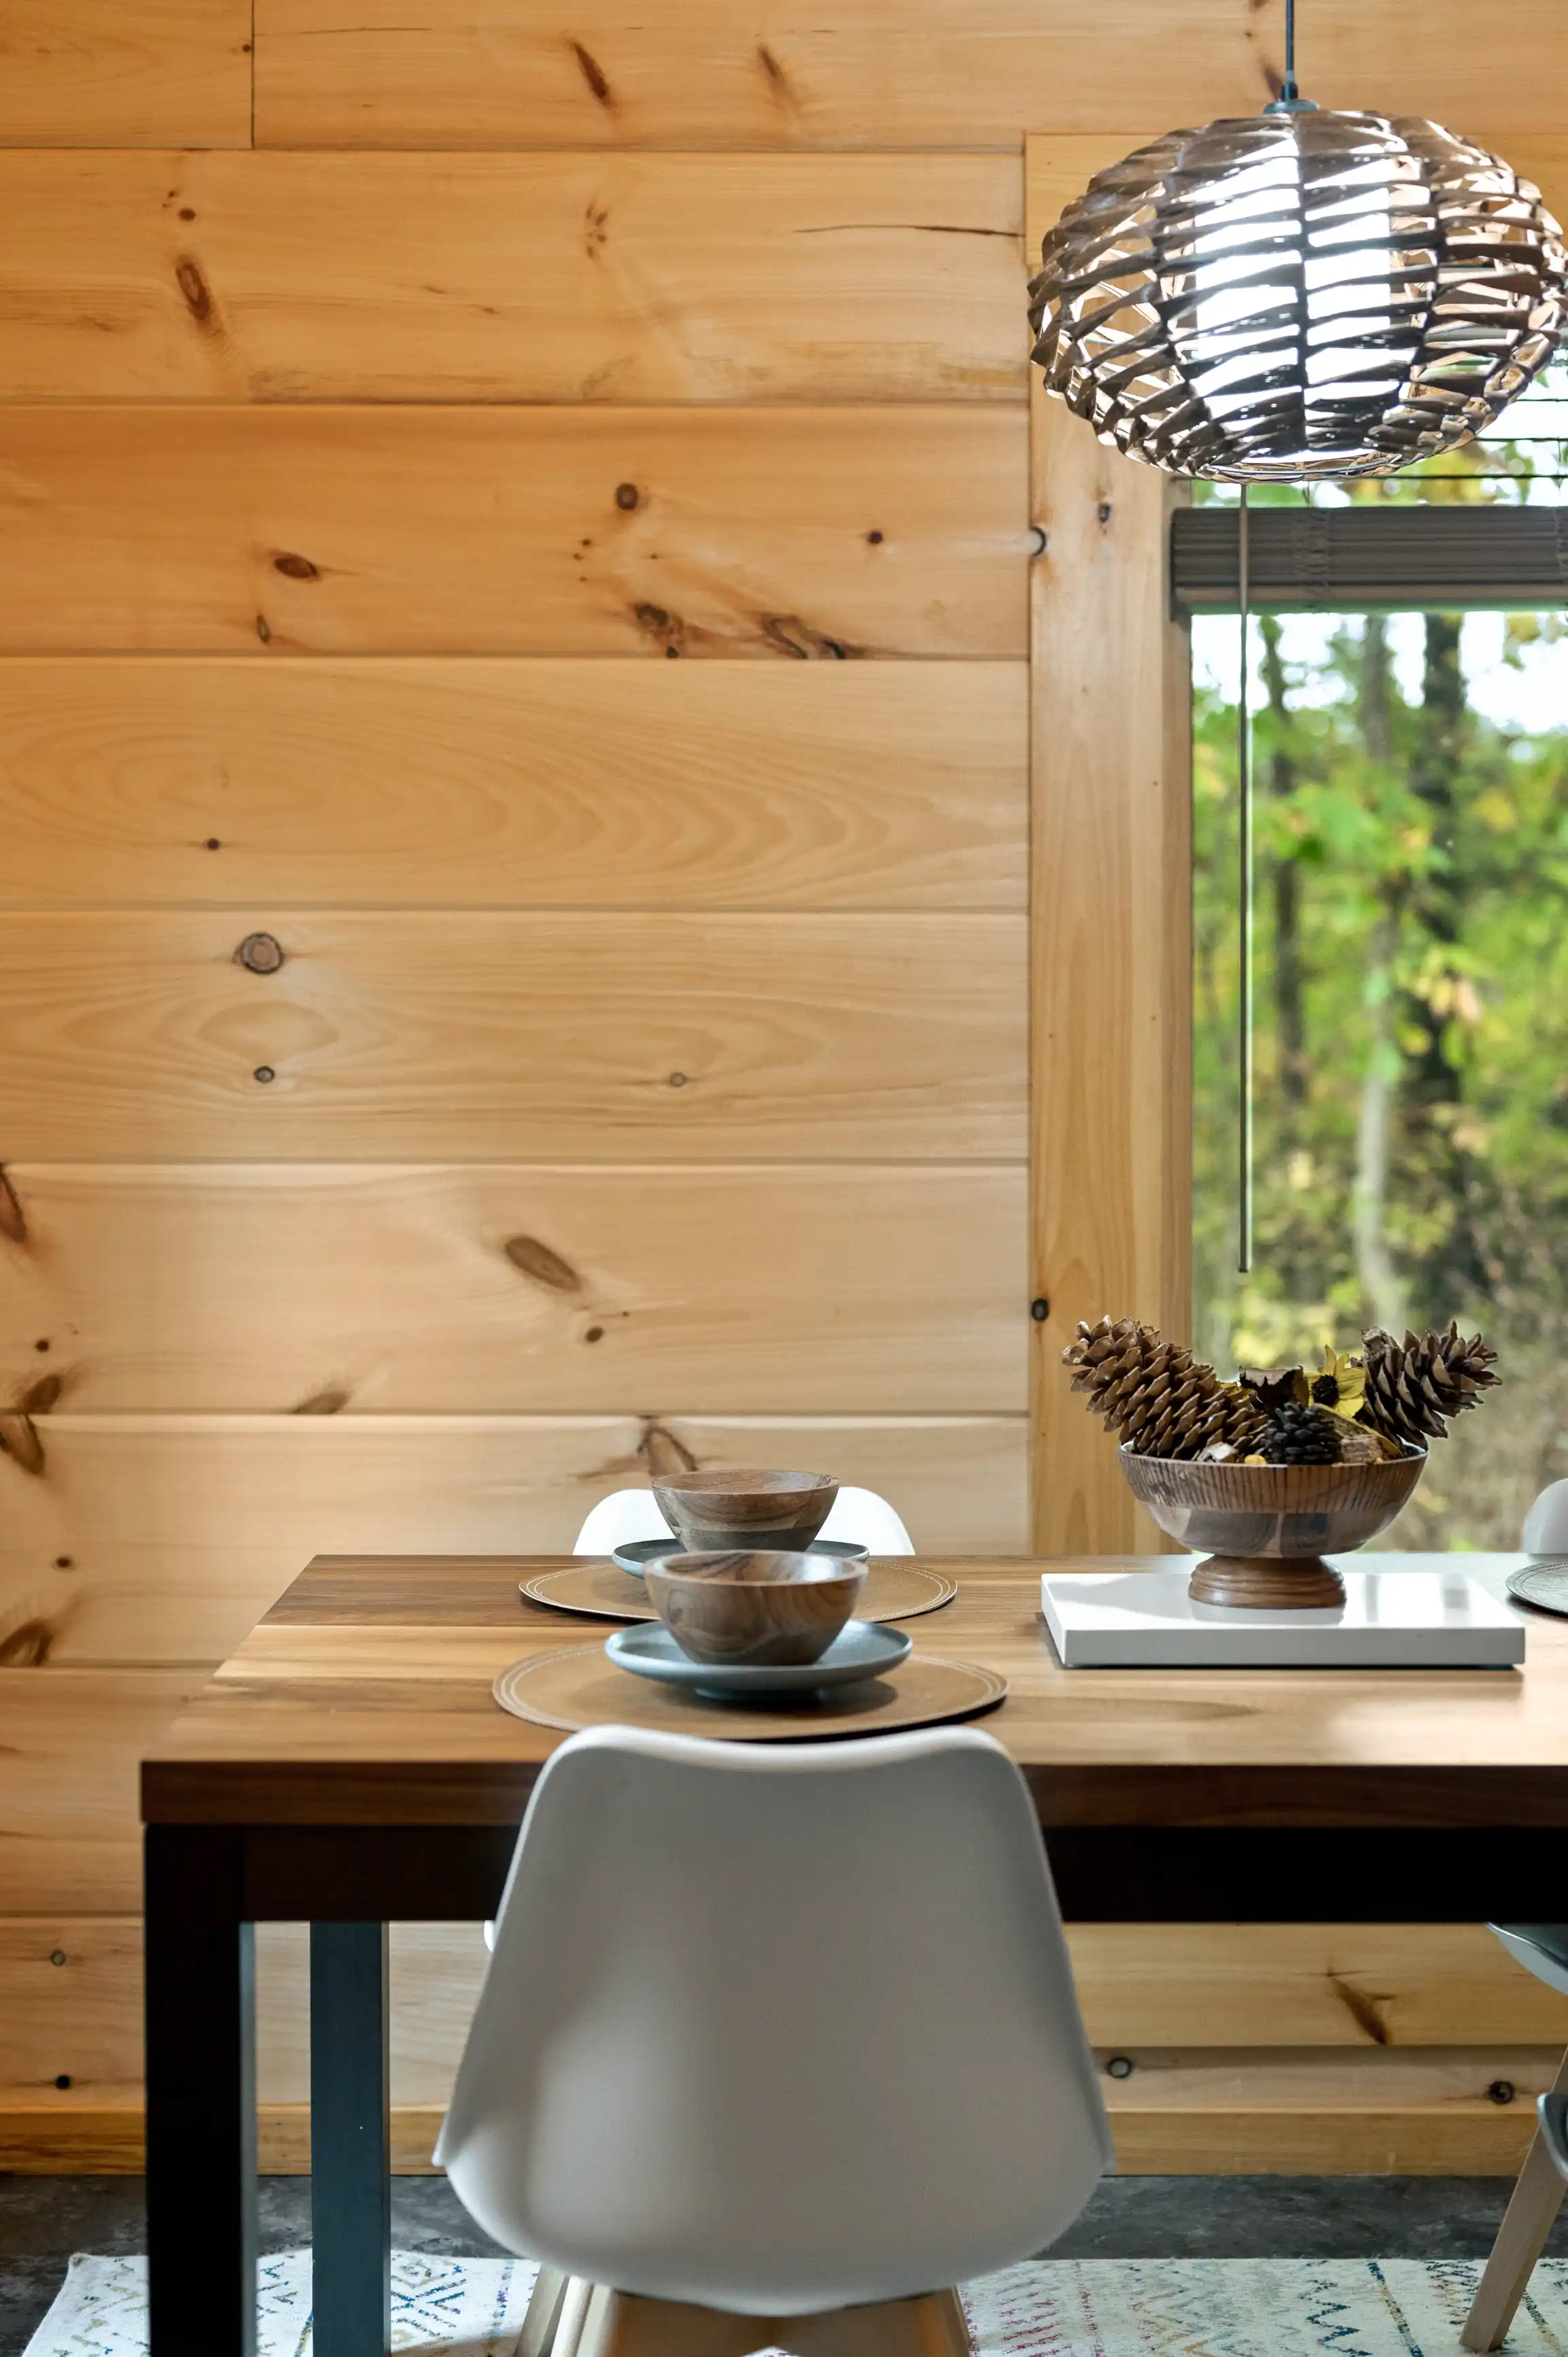 Contemporary dining setup with a wooden table, modern white chairs, a decorative bowl of pine cones, and a stylish pendant lamp in a room with wooden walls and a view of trees through the window.